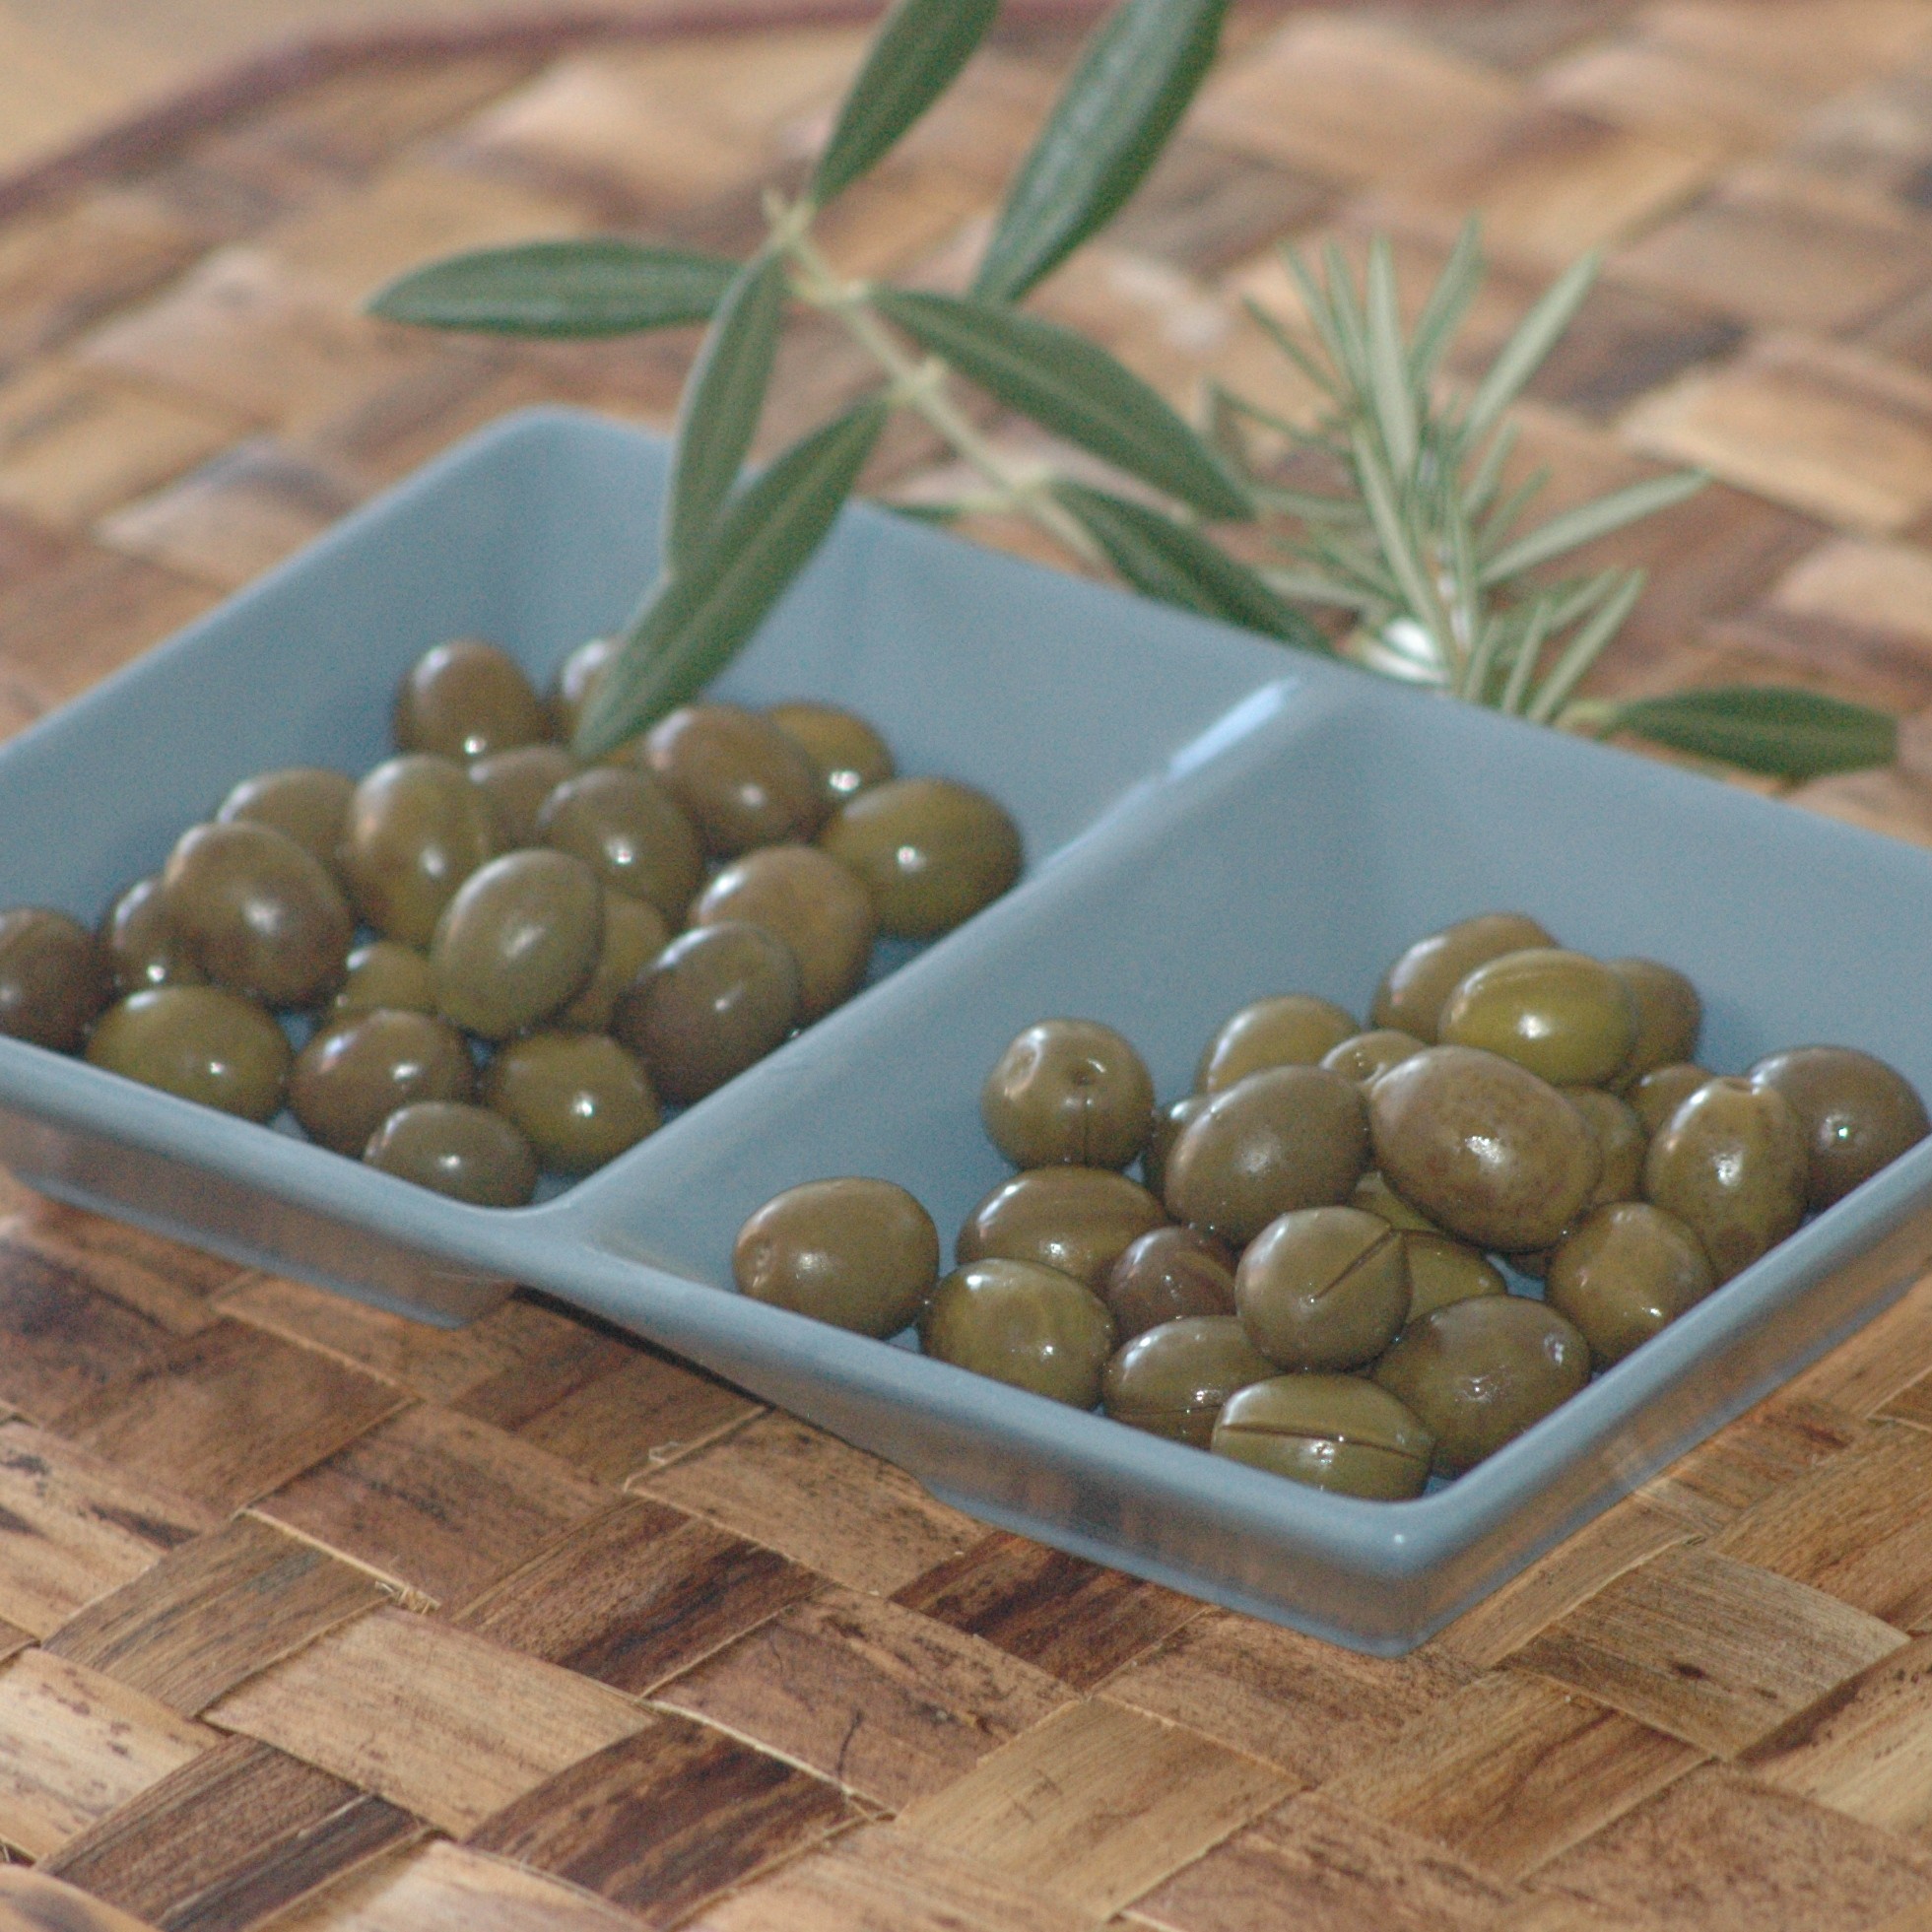 Top 98+ Images what is in the middle of green olives Updated